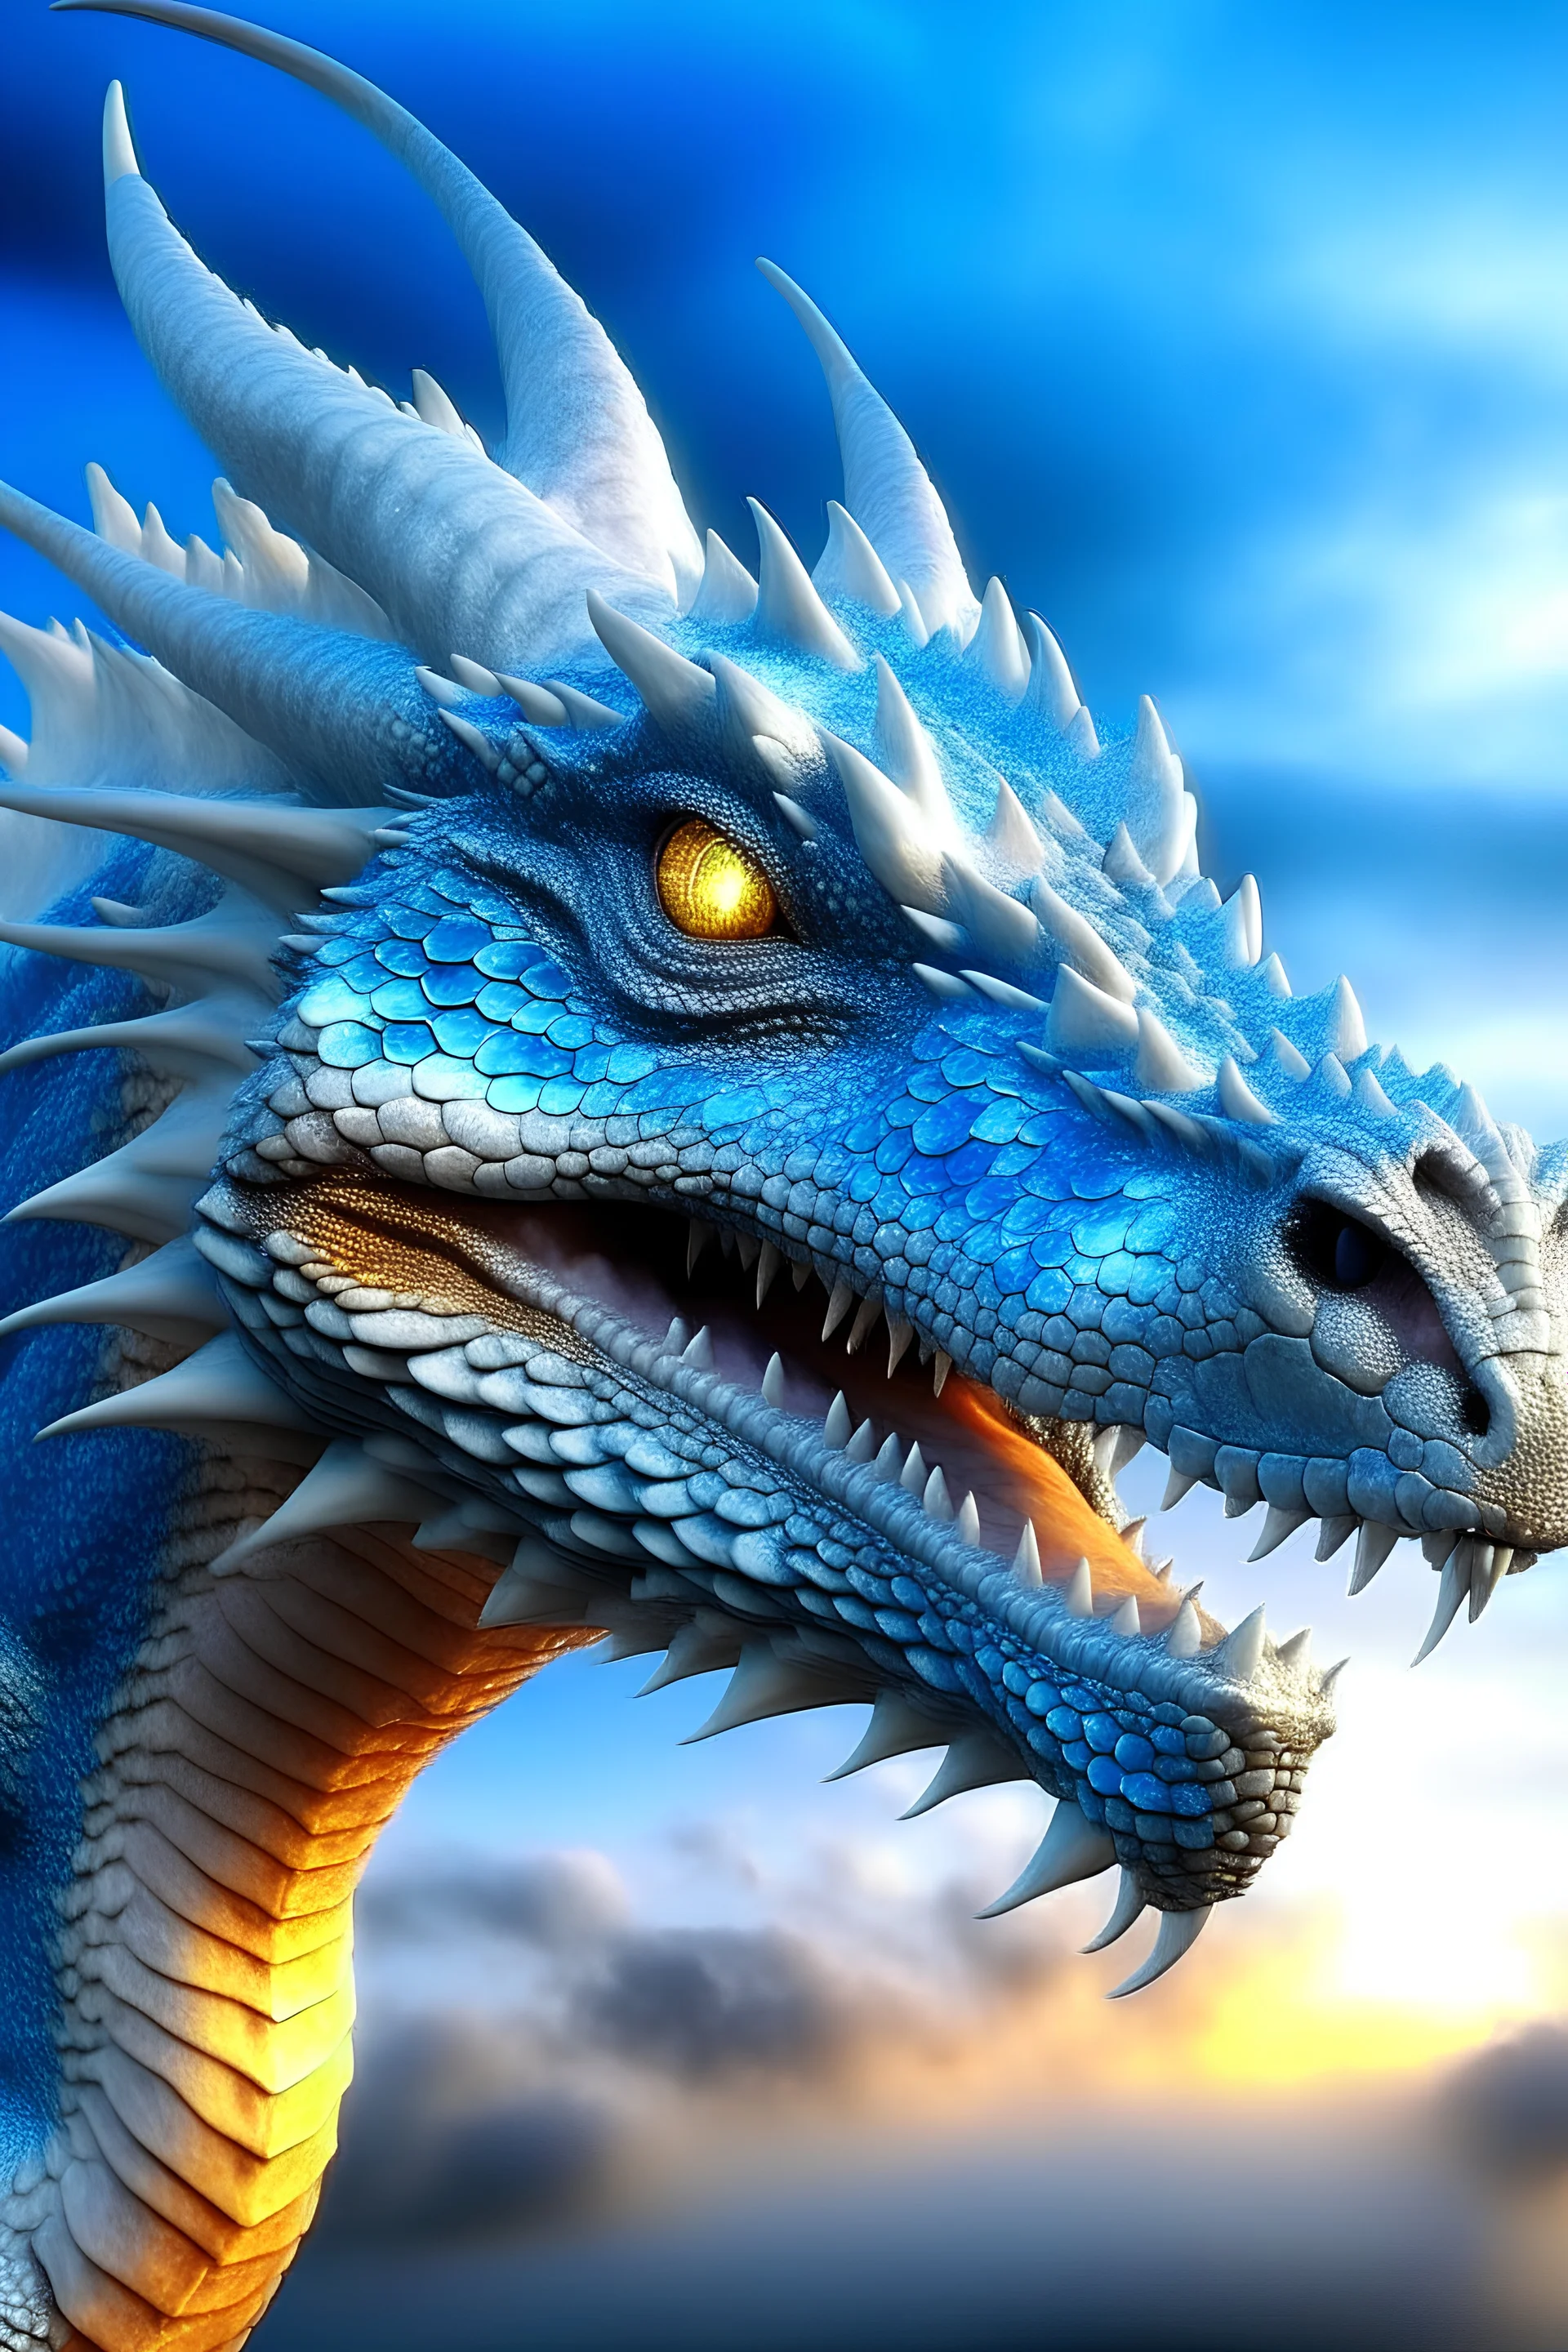 Photograph of a realistic, very beautiful dragon with glowing blue eyes, small pretty head, showing the whole dragon, flying in a beautiful sky